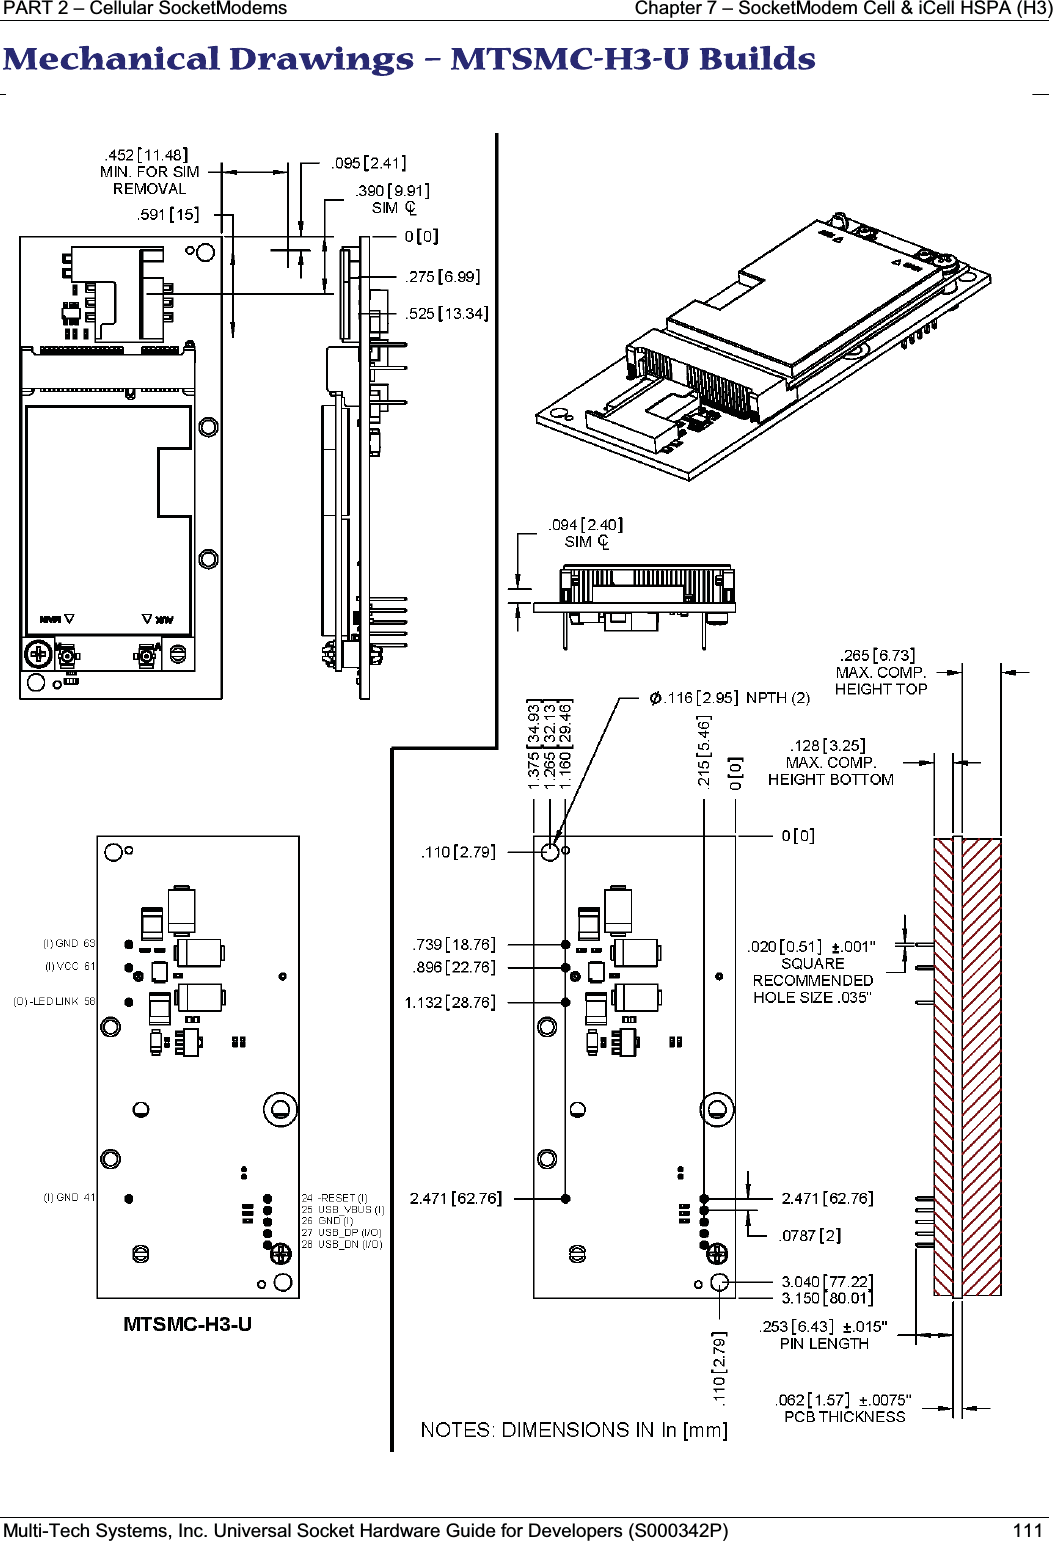 PART 2 – Cellular SocketModems Chapter 7 – SocketModem Cell &amp; iCell HSPA (H3)Multi-Tech Systems, Inc. Universal Socket Hardware Guide for Developers (S000342P) 111MMechanical Drawings – MTSMC-H3-U Builds  